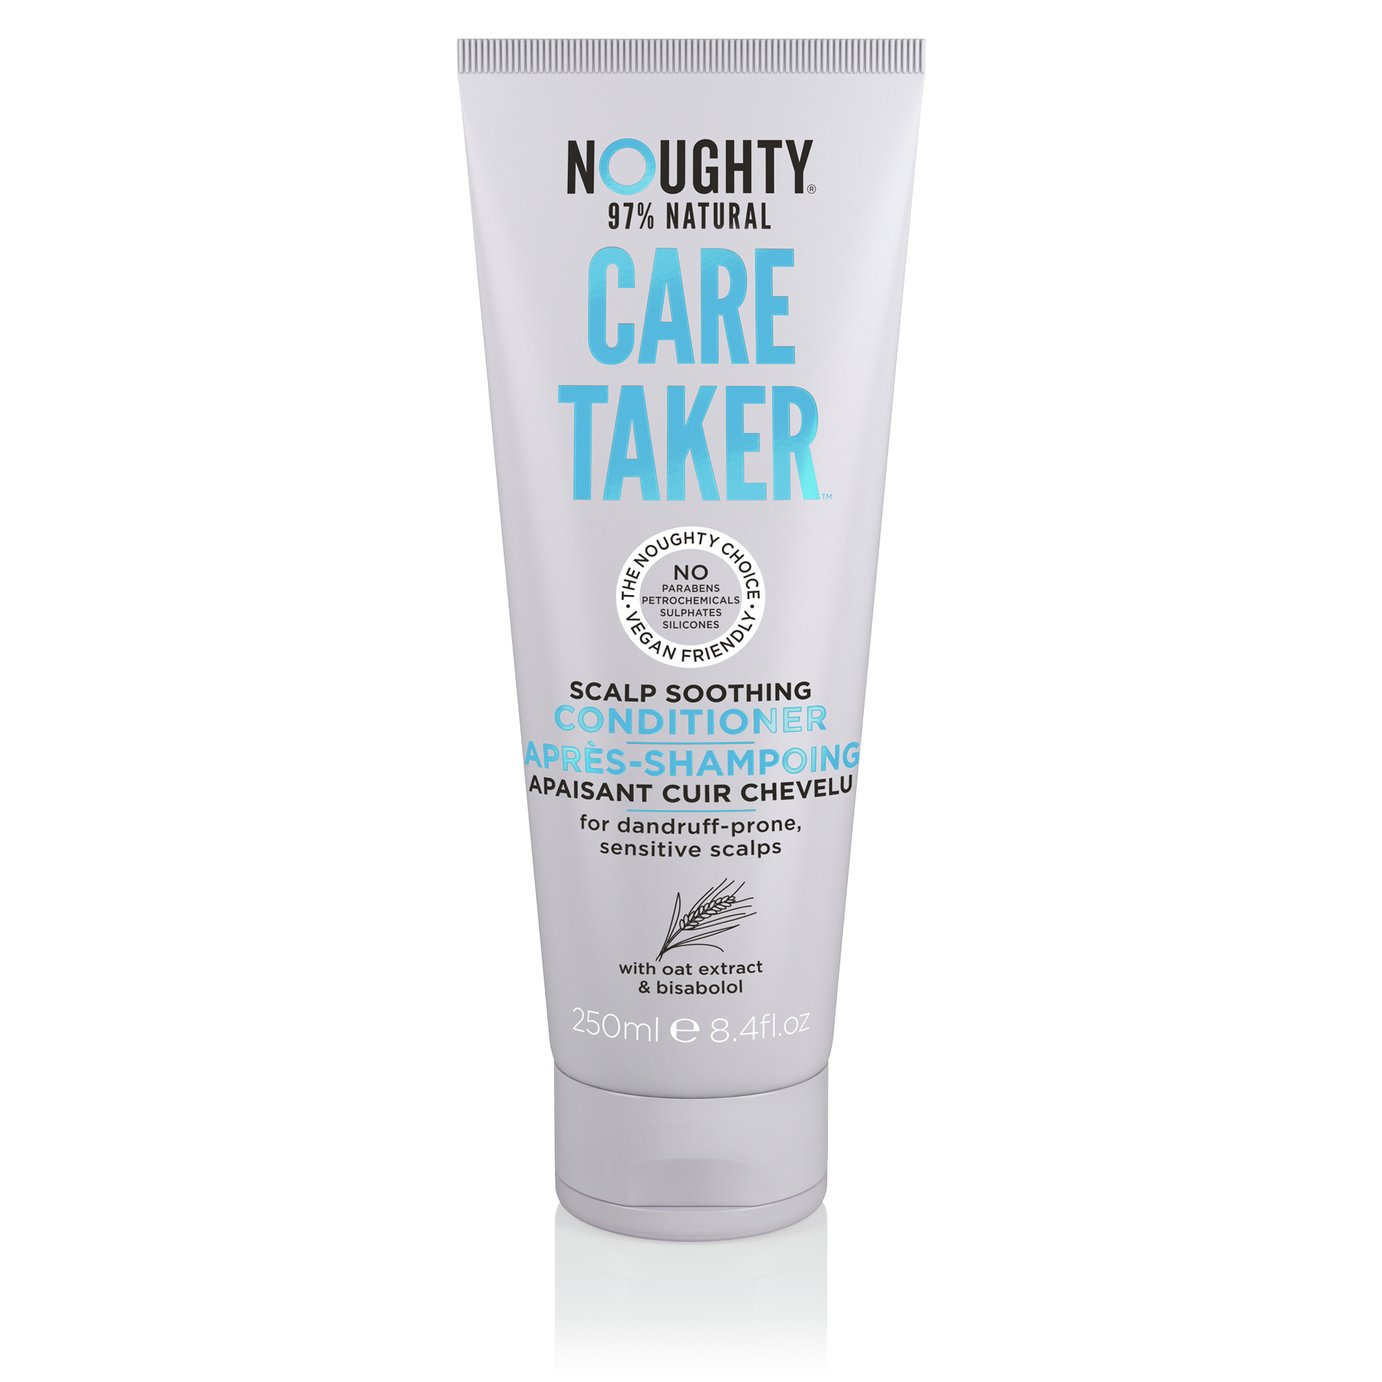 Noughty Care Taker Conditioner - 250ml